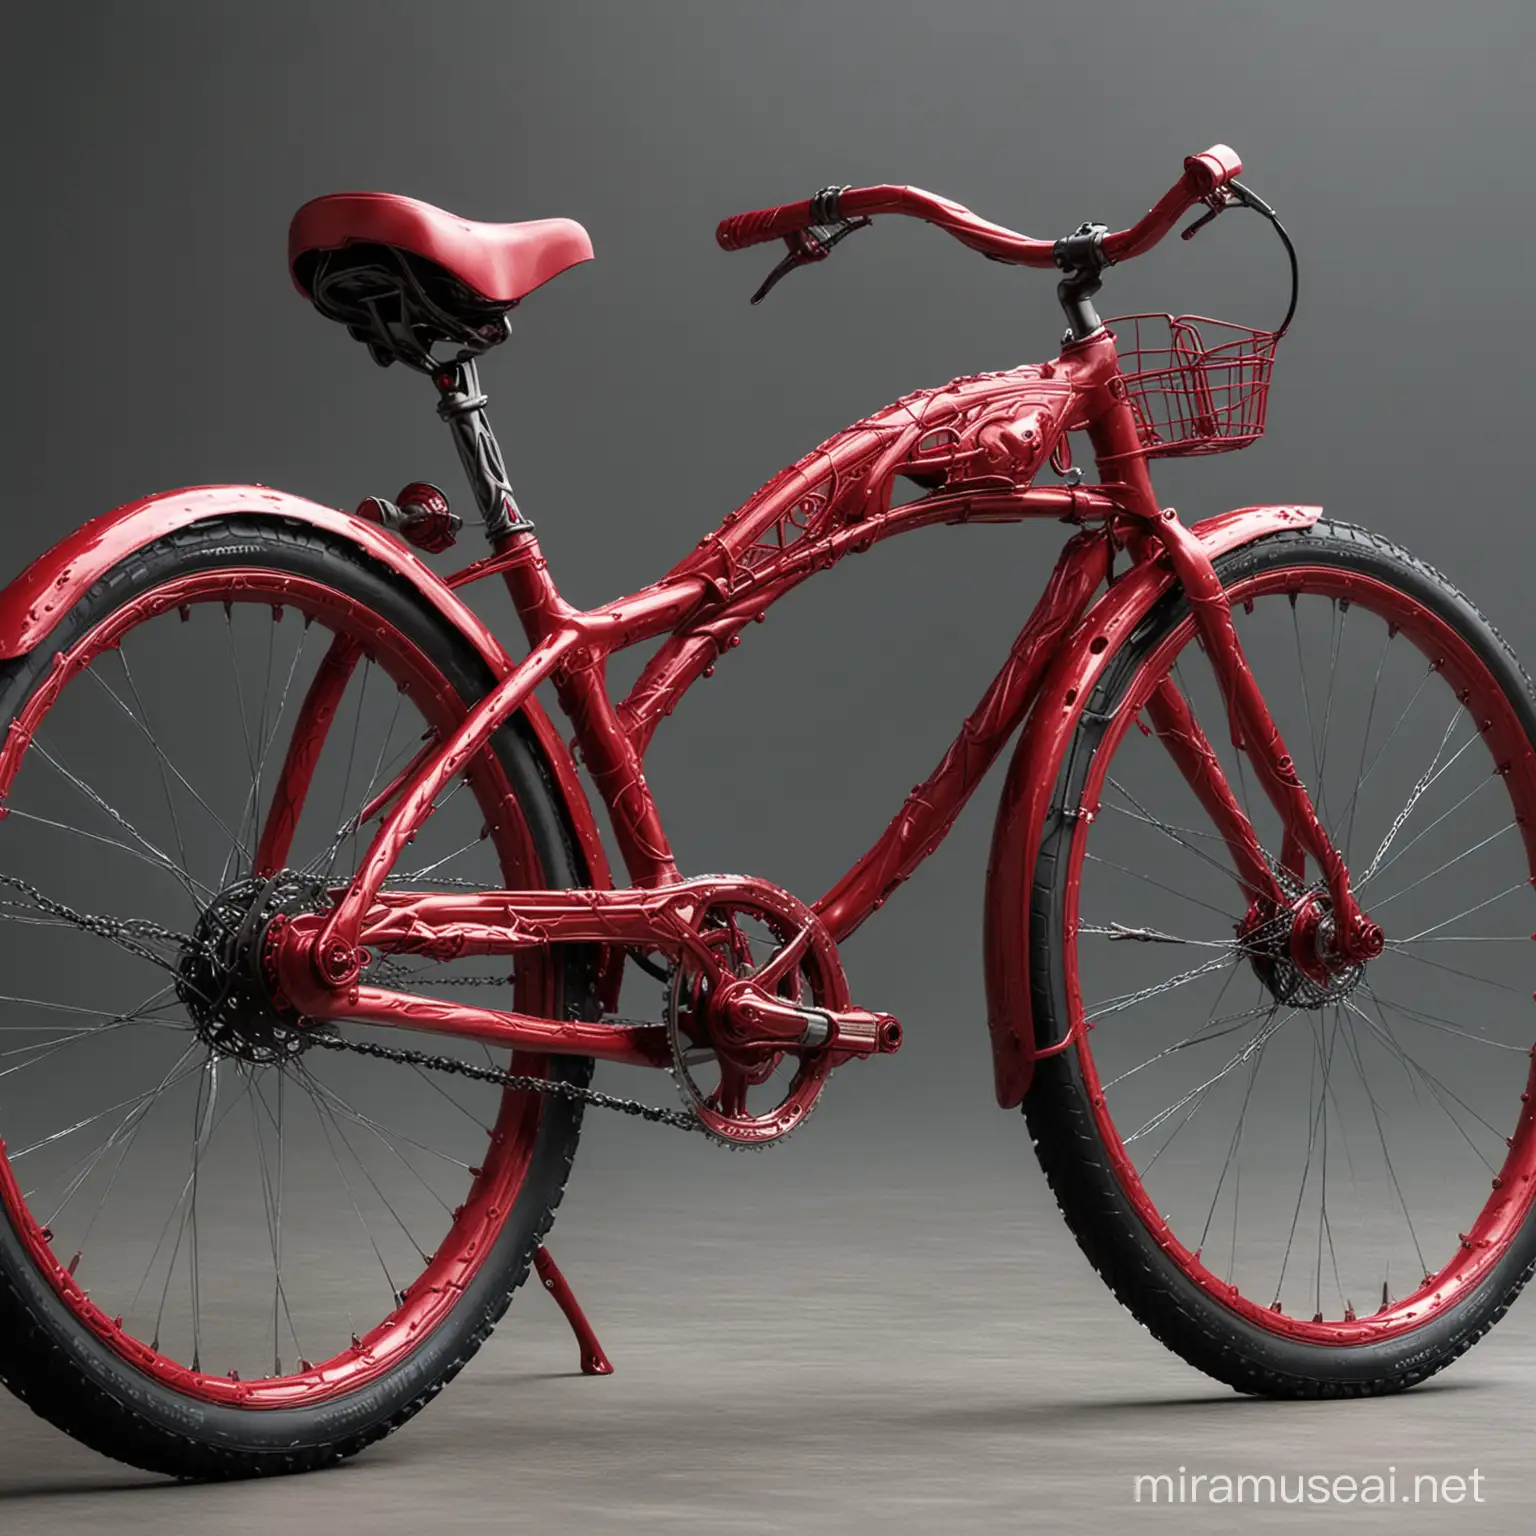 Scarlet WitchInspired Stylish Bicycle in Fantasy Setting